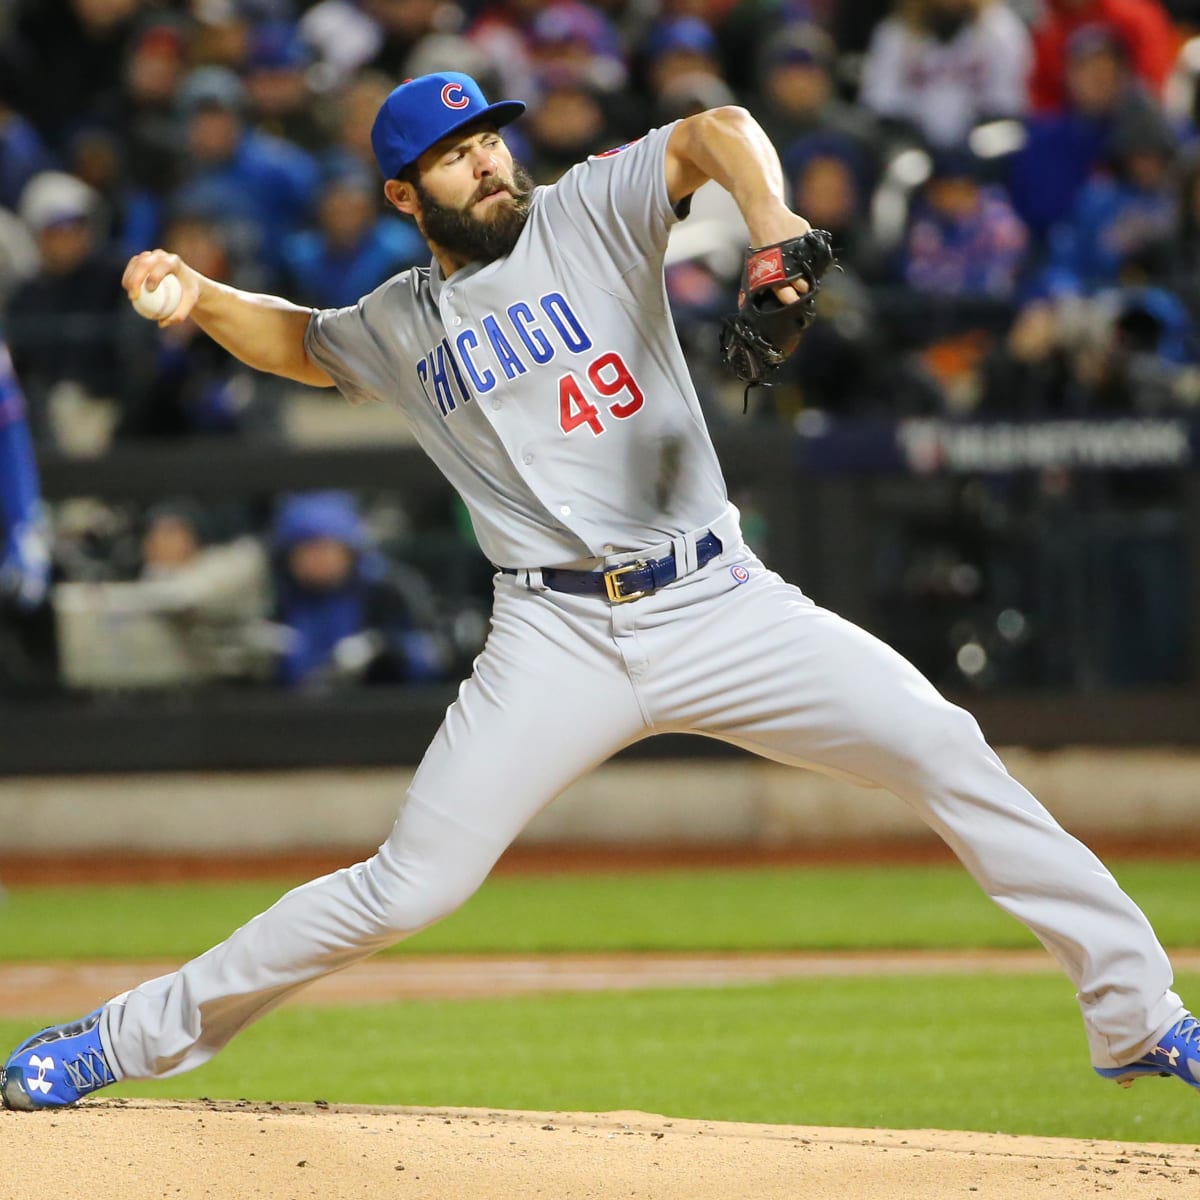 NL Cy Young debate: Jake Arrieta vs. Zack Greinke. And what about